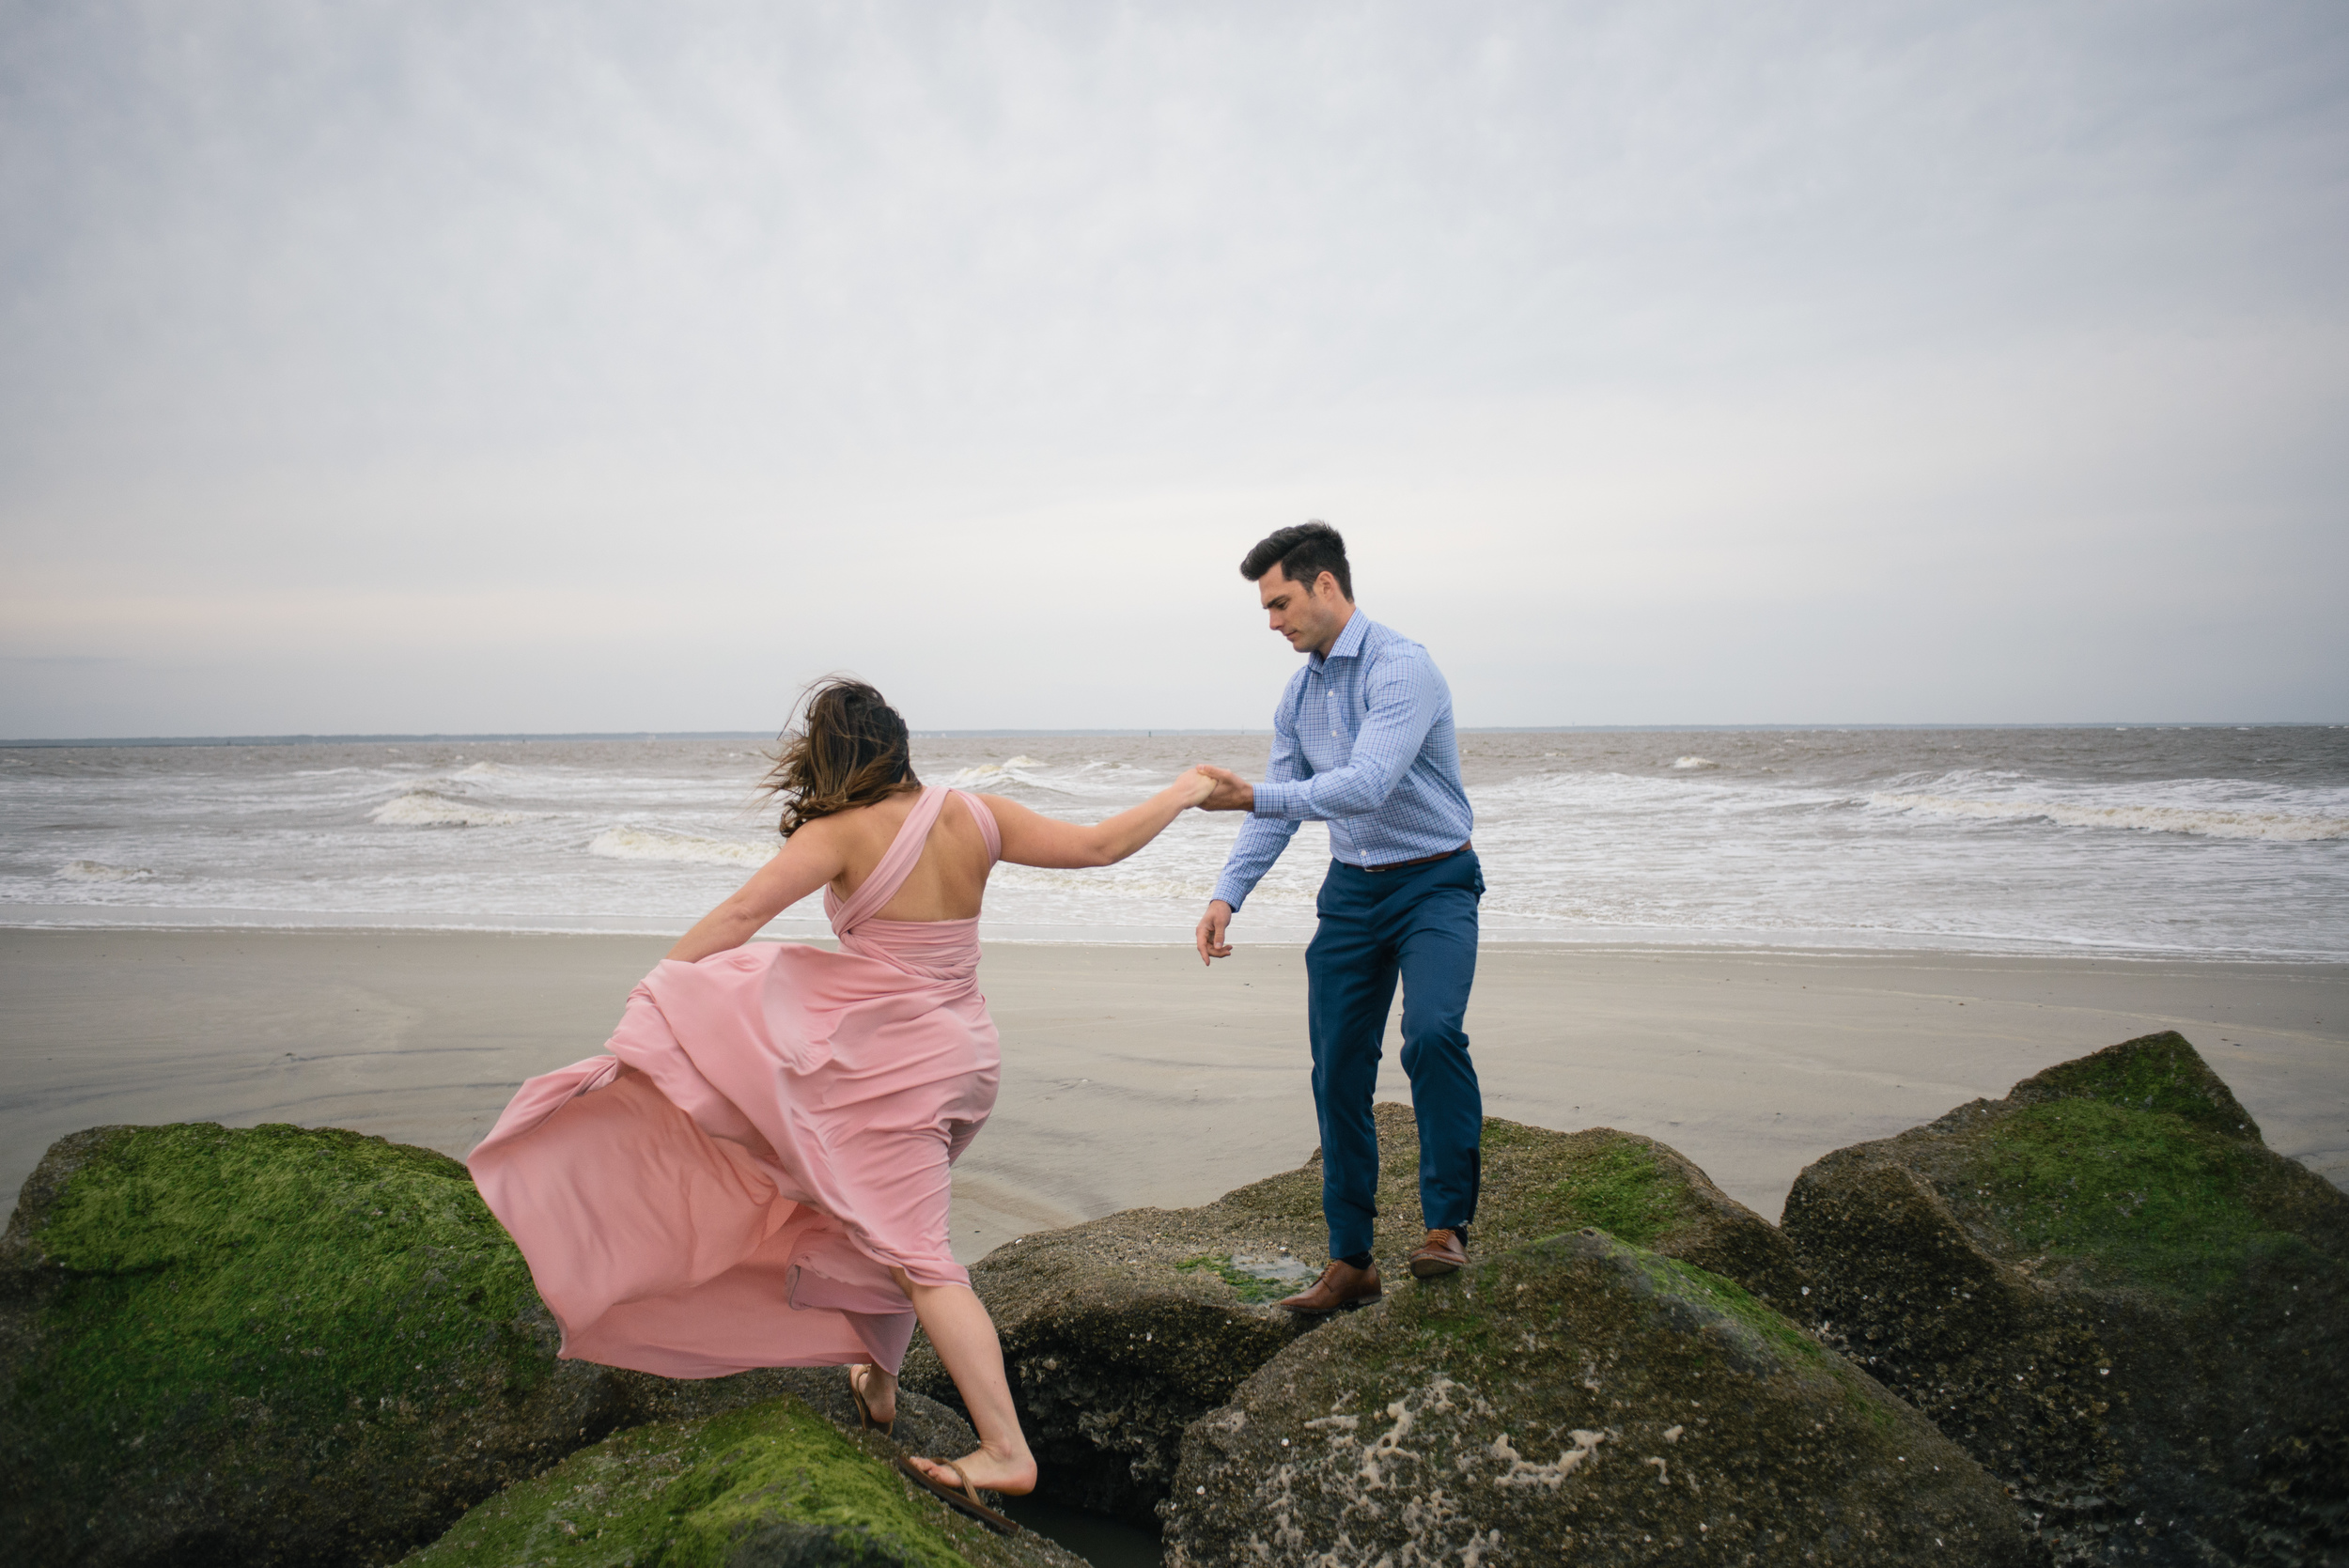 brownlyn-and-zach-tybee-island-engagement-session-april-2016-m-newsom-photography- (209 of 263).jpg